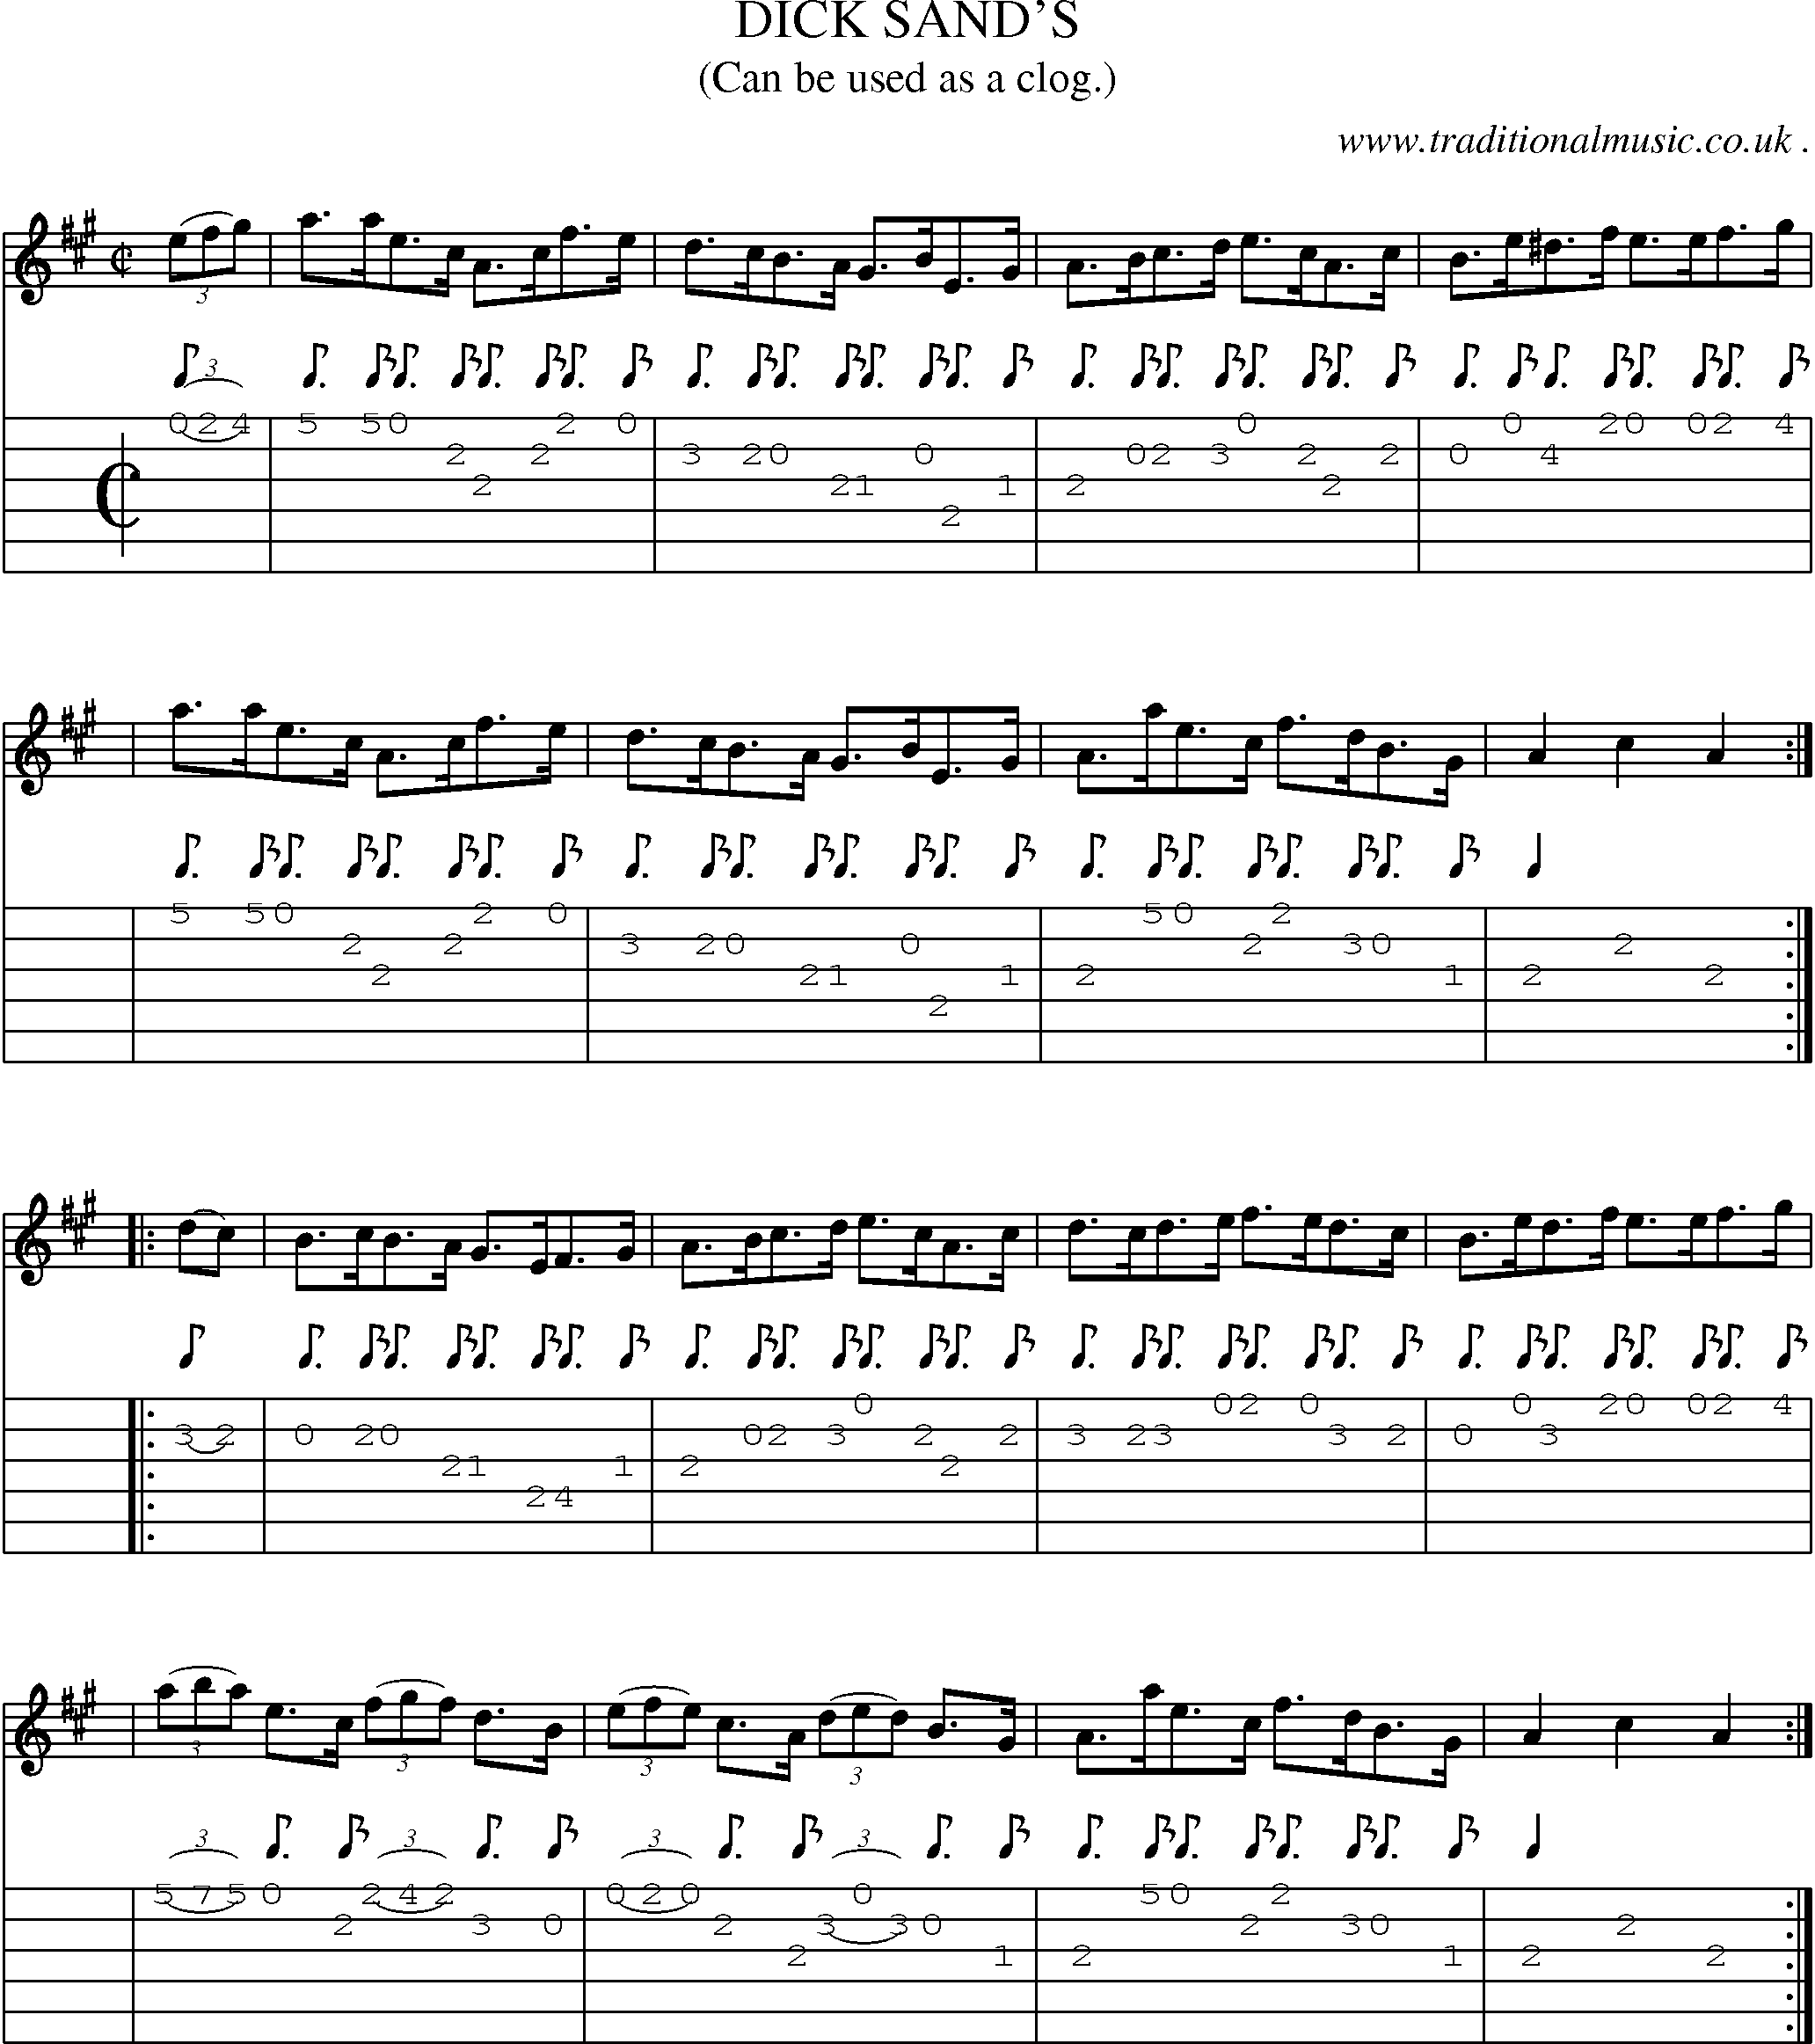 Sheet-Music and Guitar Tabs for Dick Sands